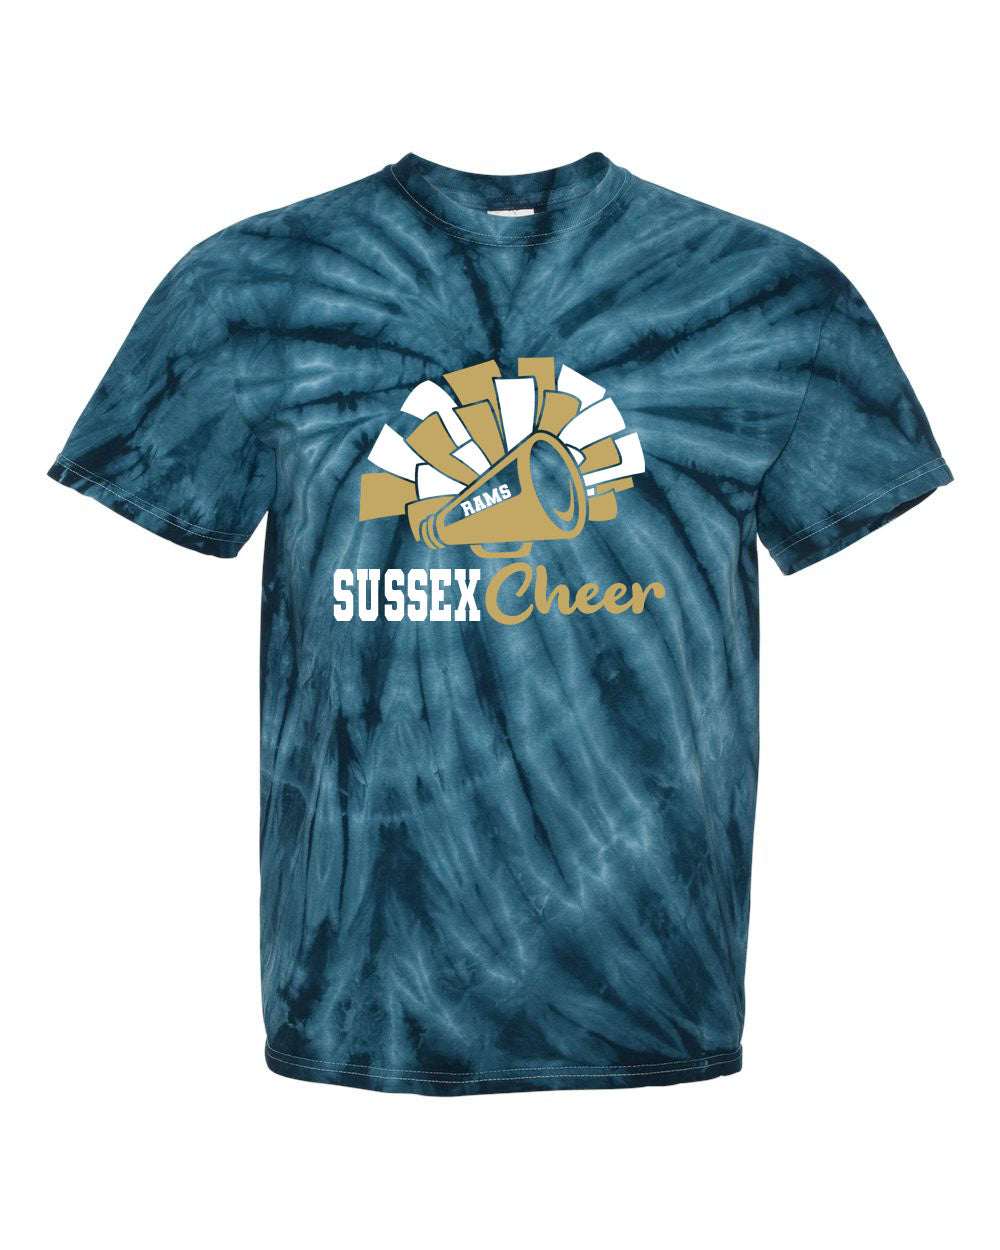 Sussex Middle Cheer Tie Dye t-shirt Design 2